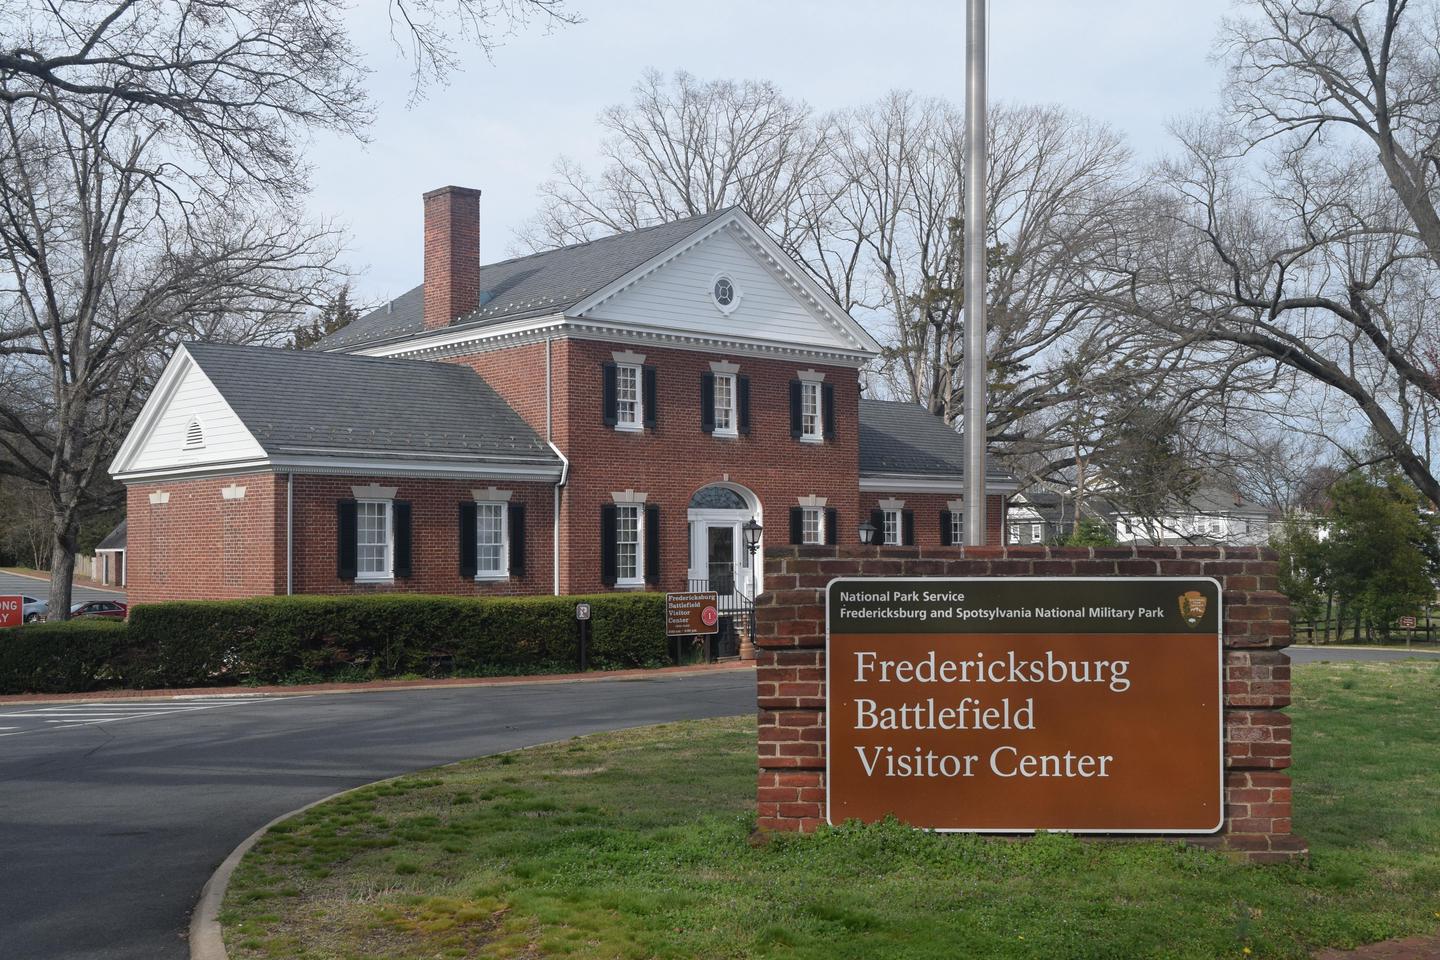 Fredericksburg Visitor Center, with signCome inside the Fredericksburg Battlefield Visitor Center for orientation, exhibit, and the park film.